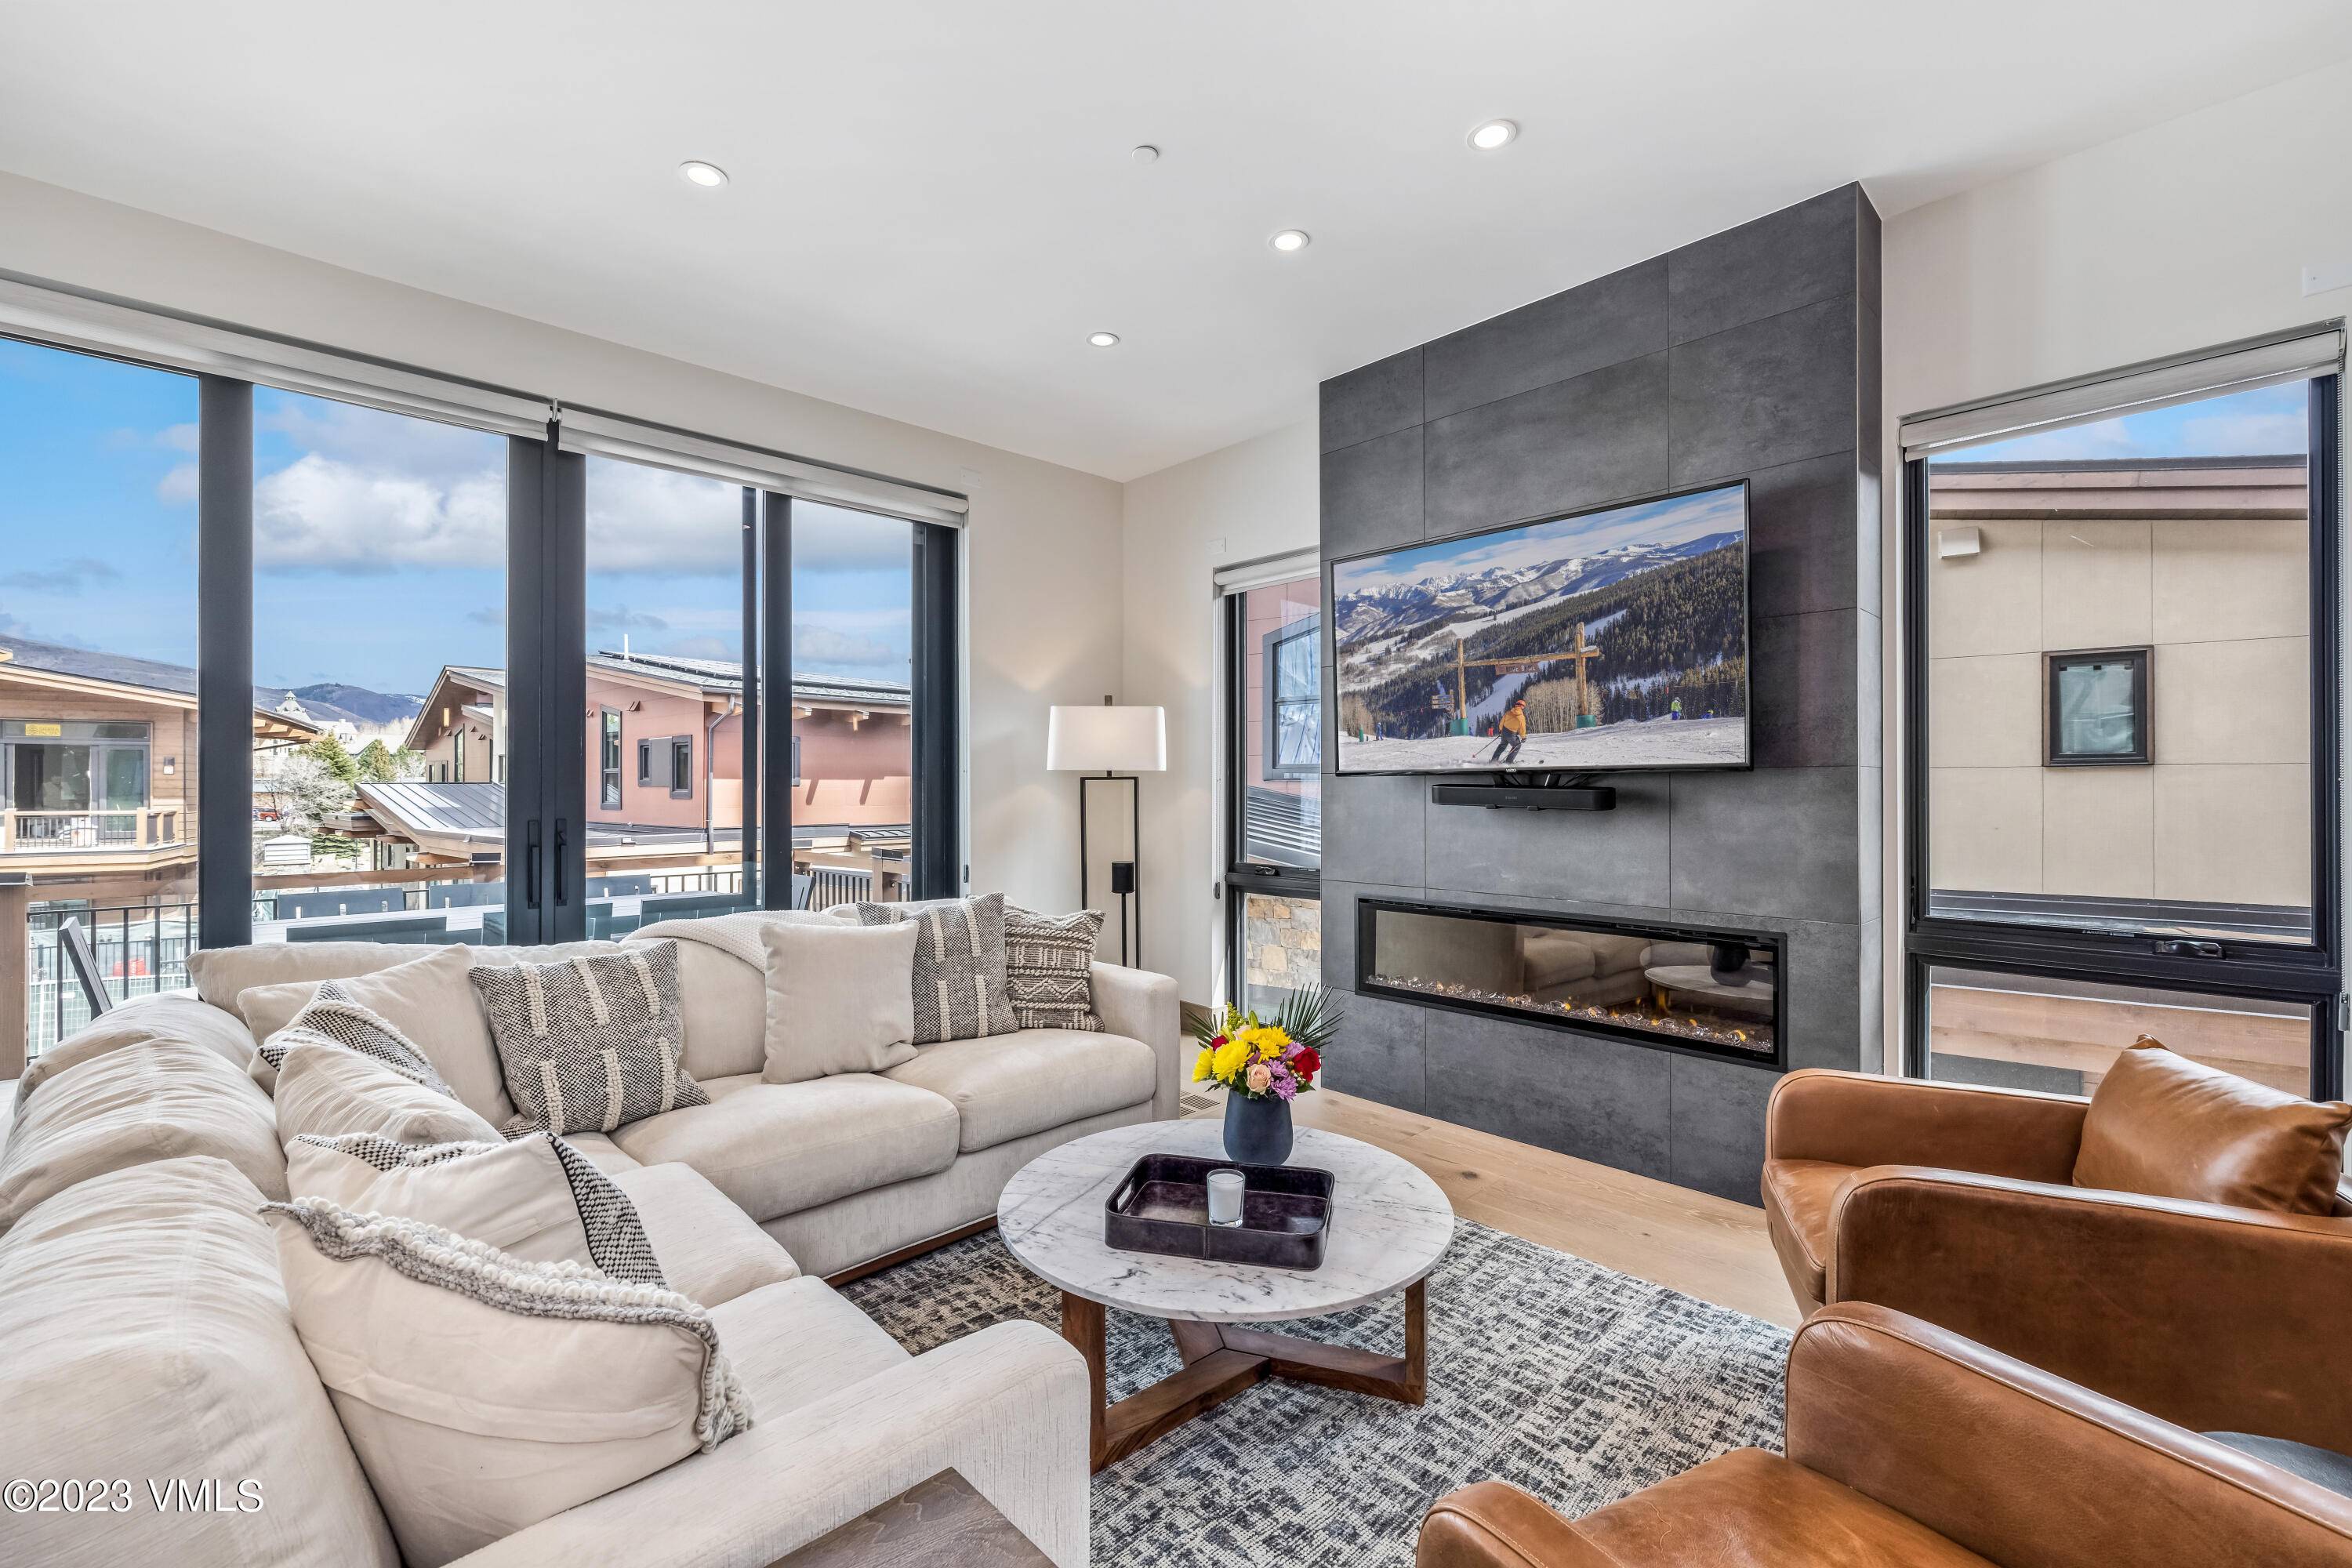 Immerse yourself in luxury and convenience at one of the newest and most desirable neighborhoods in the Vail Valley, One Riverfront.